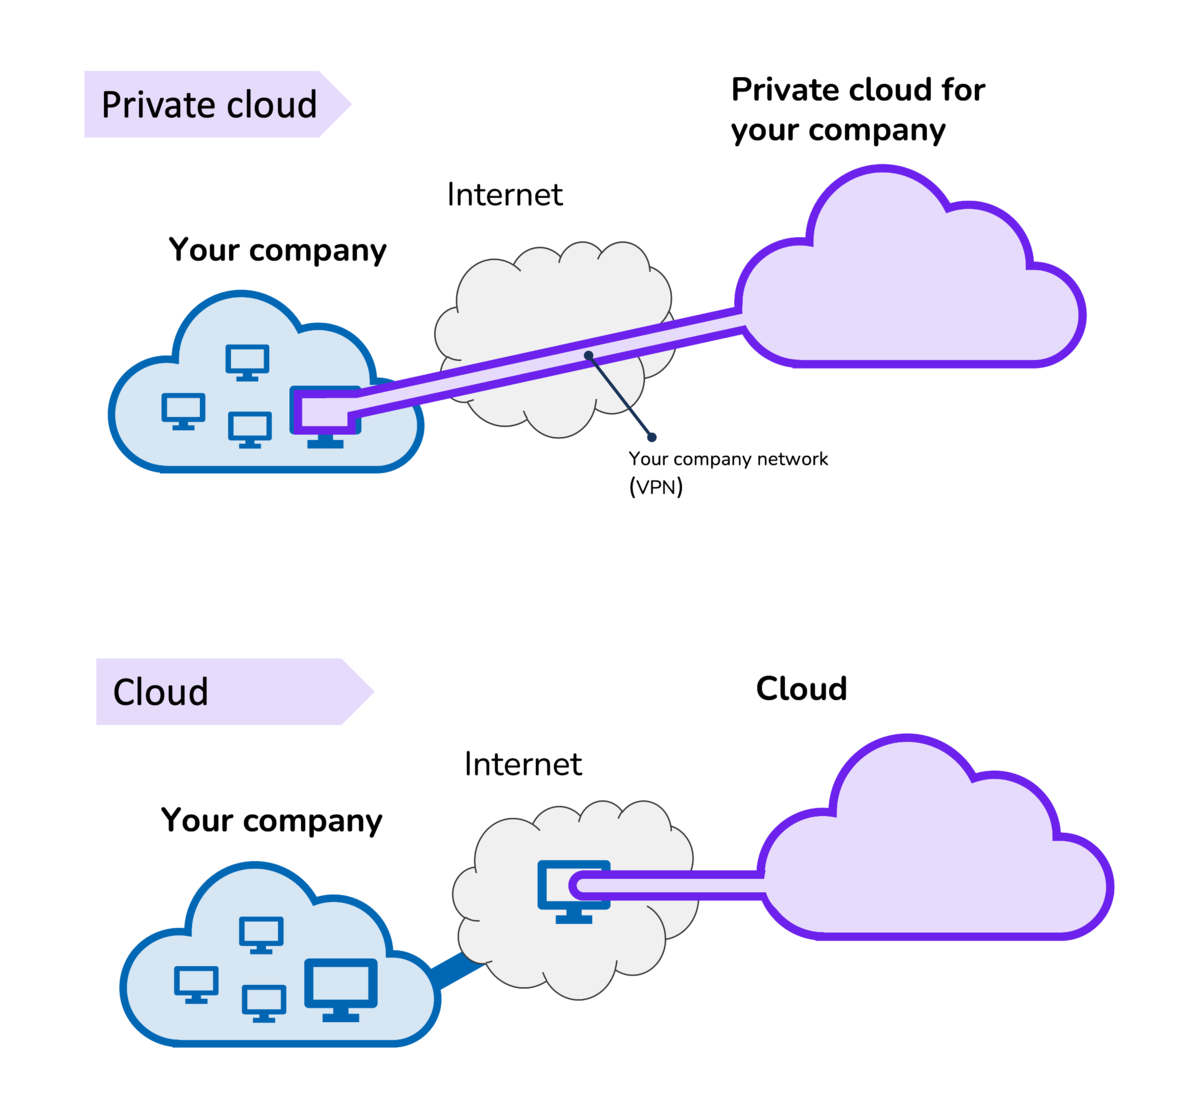 How the private cloud works